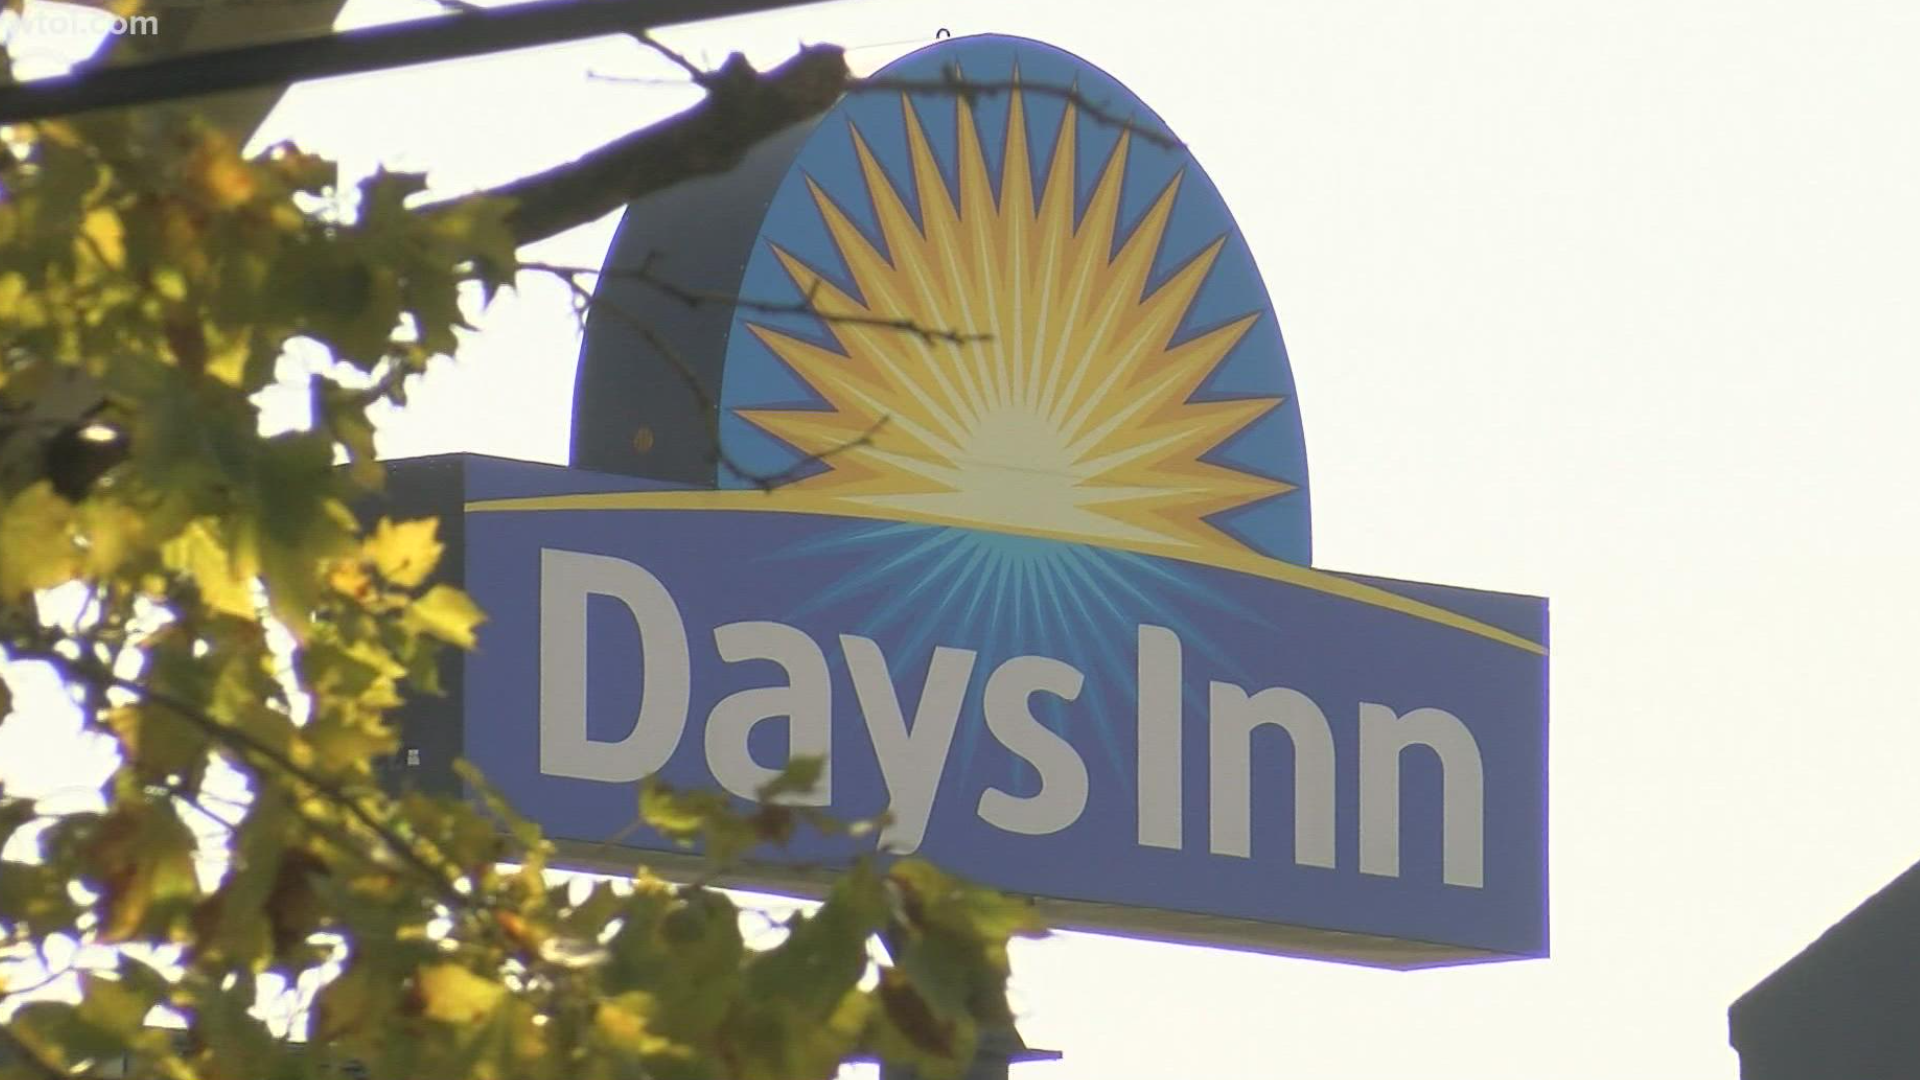 The Toledo Lucas County Homelessness Board was able to connect with 41 people staying at the Miami Street Days Inn, 21 of whom were children.